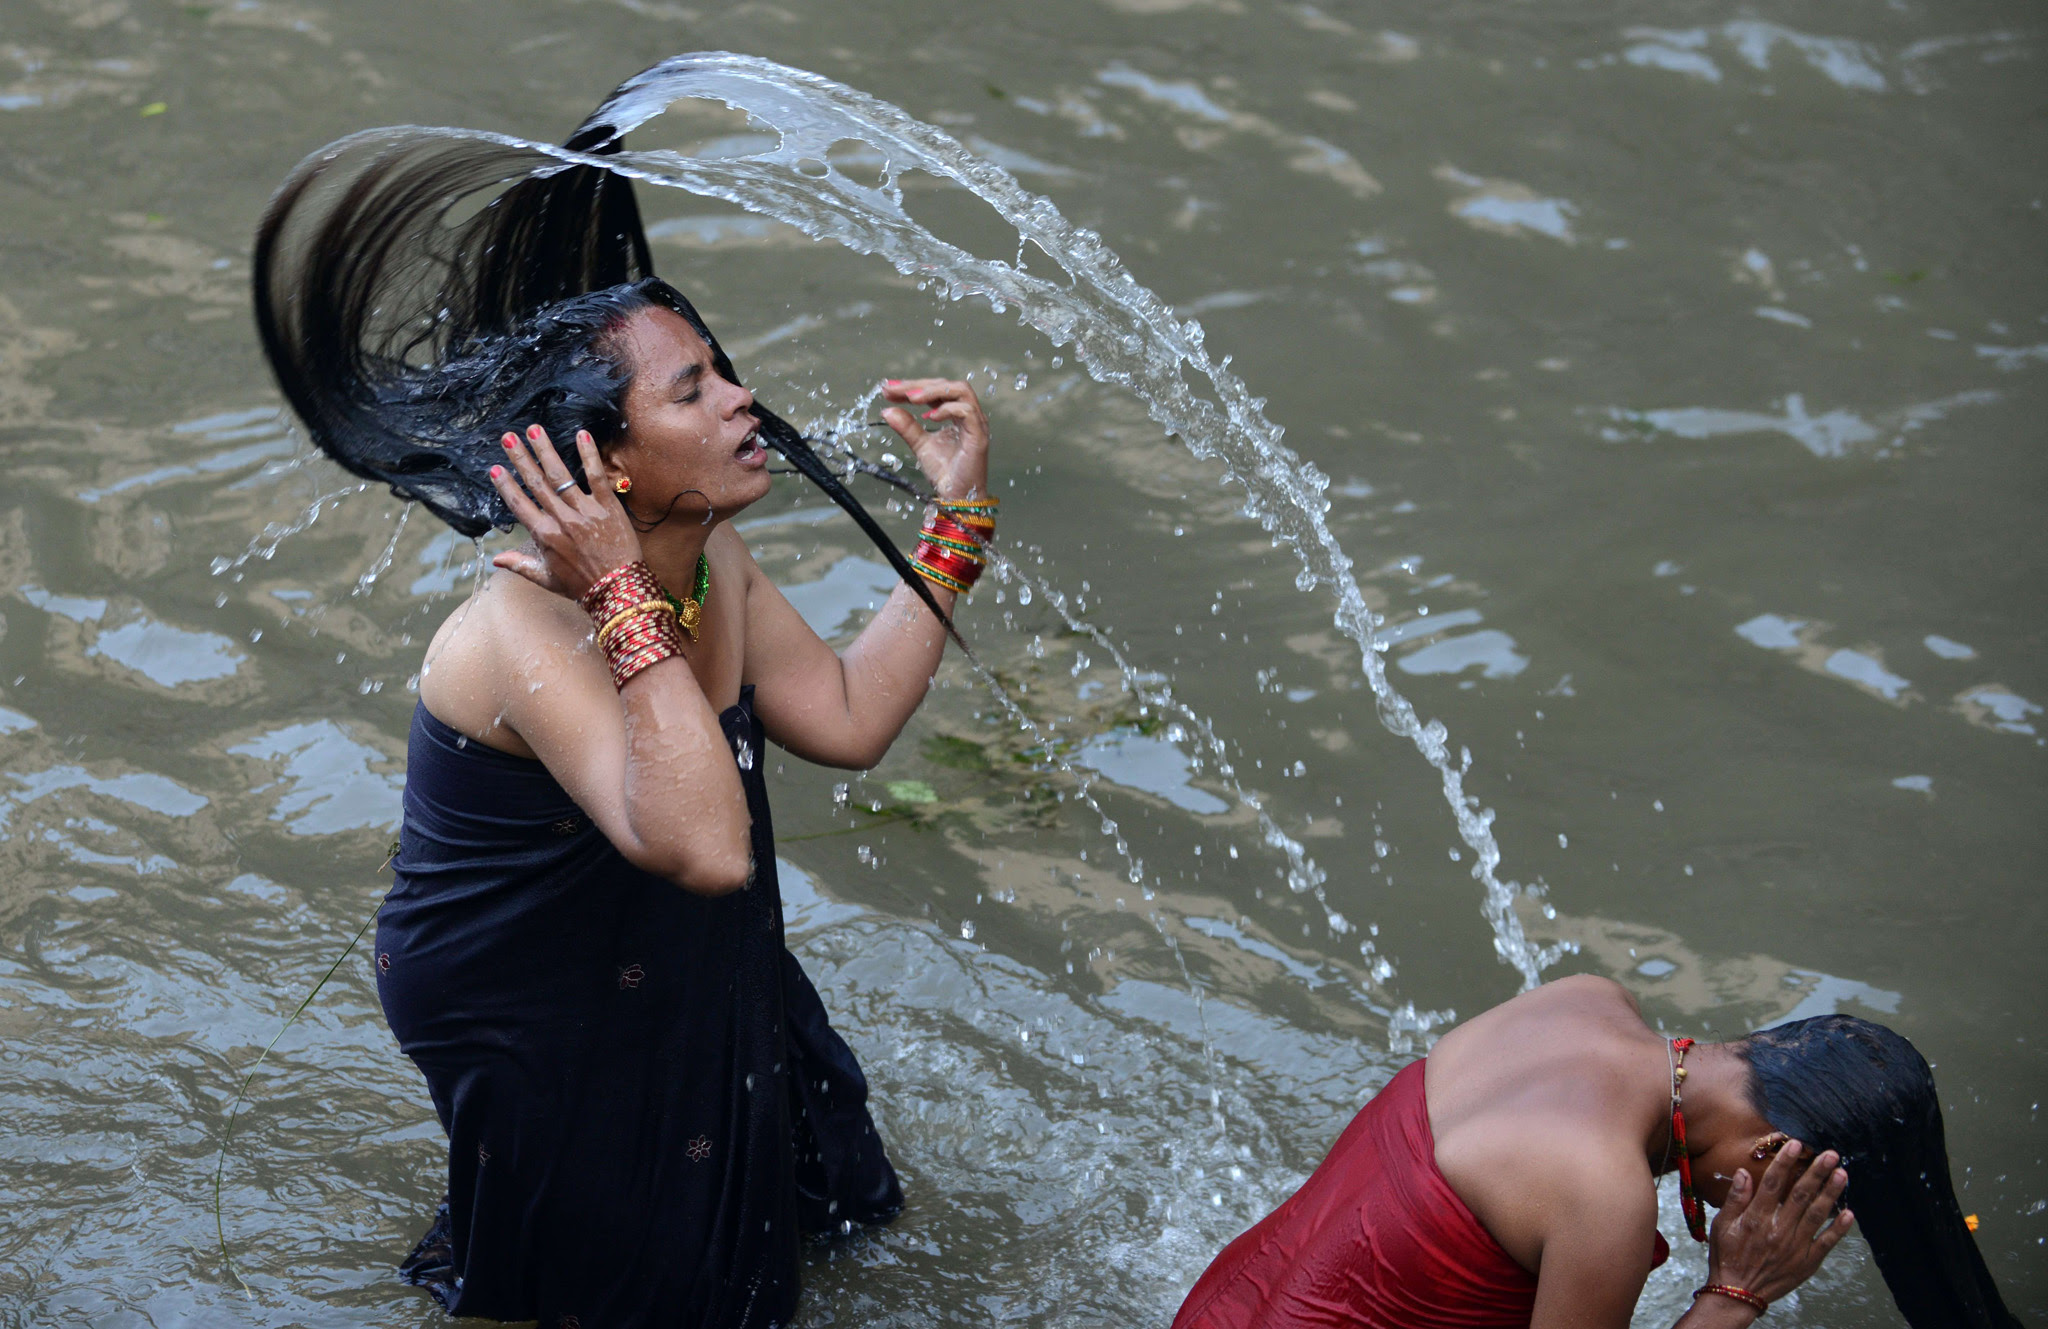 Nepalese Hindu women take a ritual bath in the Bagmati River during the Rishi Panchami festival in Kathmandu. Rishi Panchami marks the end of the three-day long Teej festival, in which married women fast and pray for the good health of their husbands to Shiva, the Hindu god of destruction, while unmarried women wish for handsome husbands and happy conjugal lives.